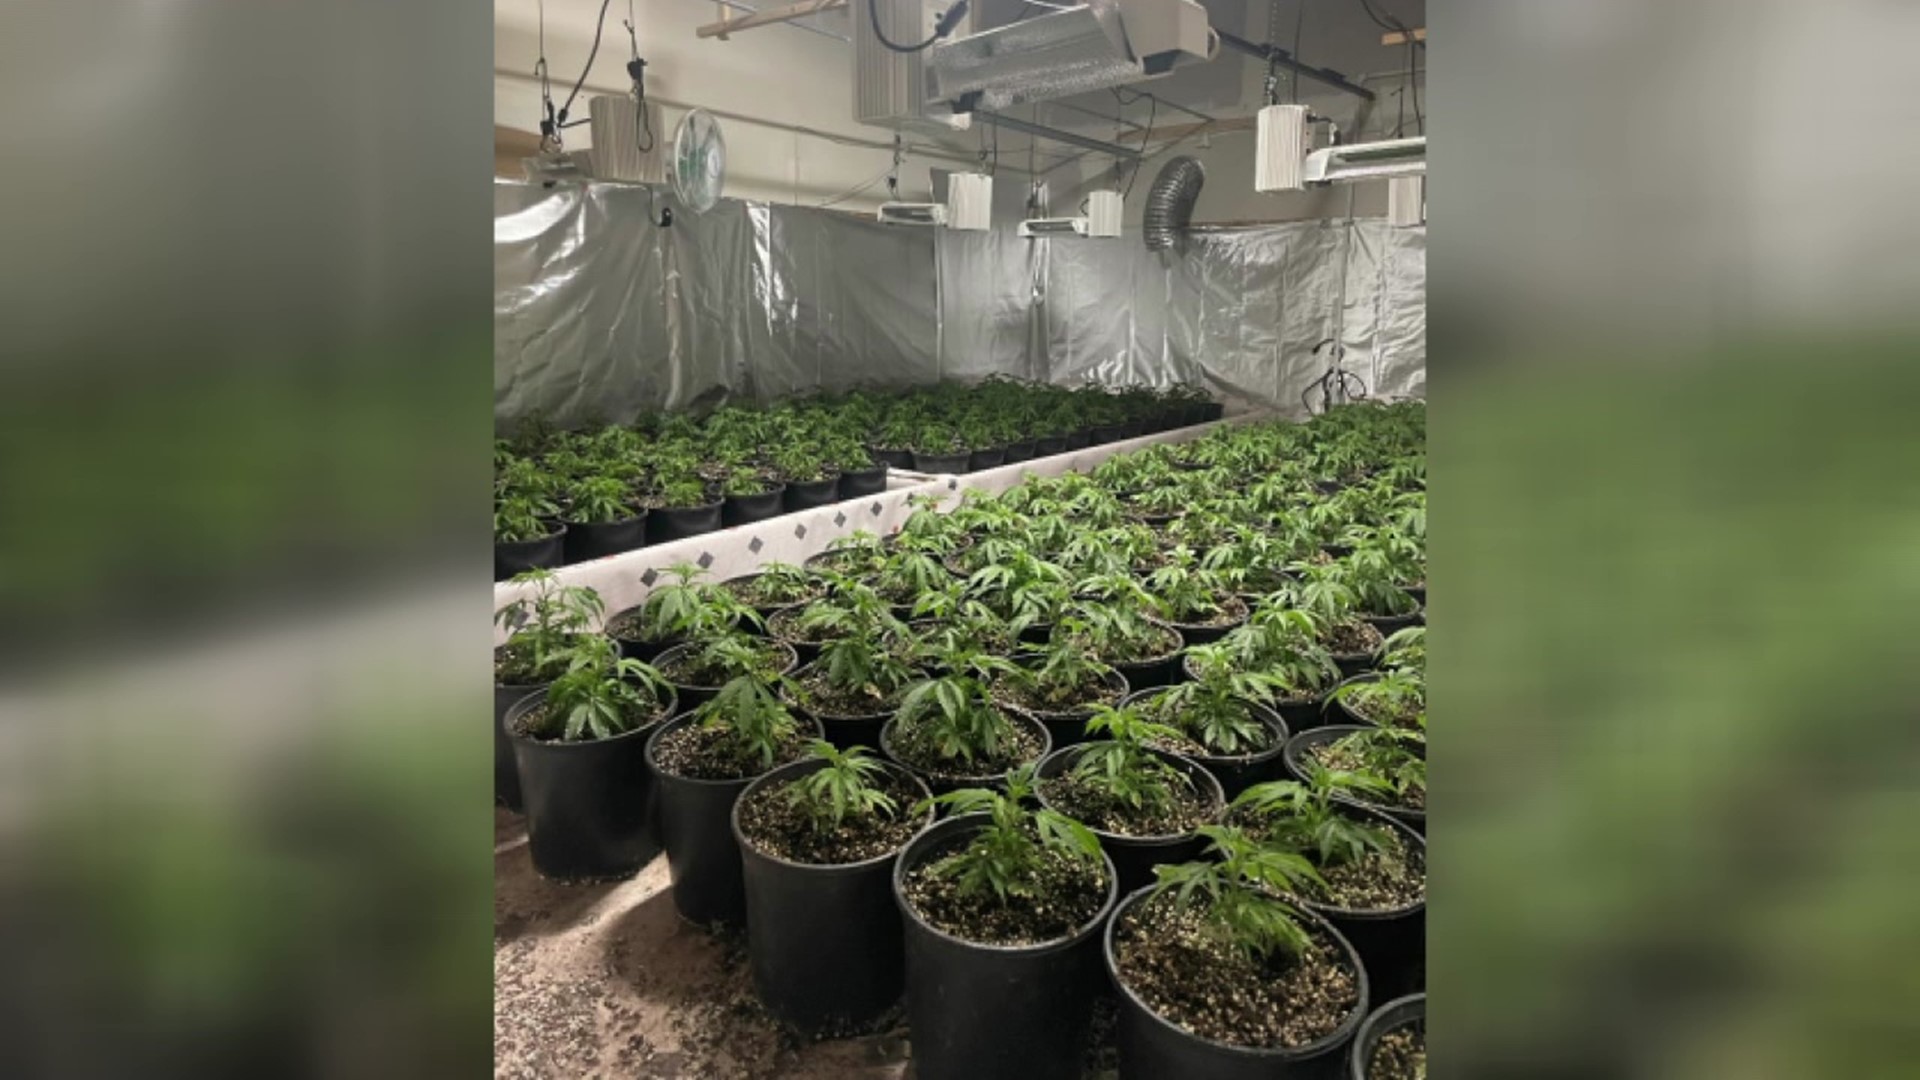 Authorities found approximately 600 marijuana plants and 100 pounds of harvested marijuana at a home in Scranton.